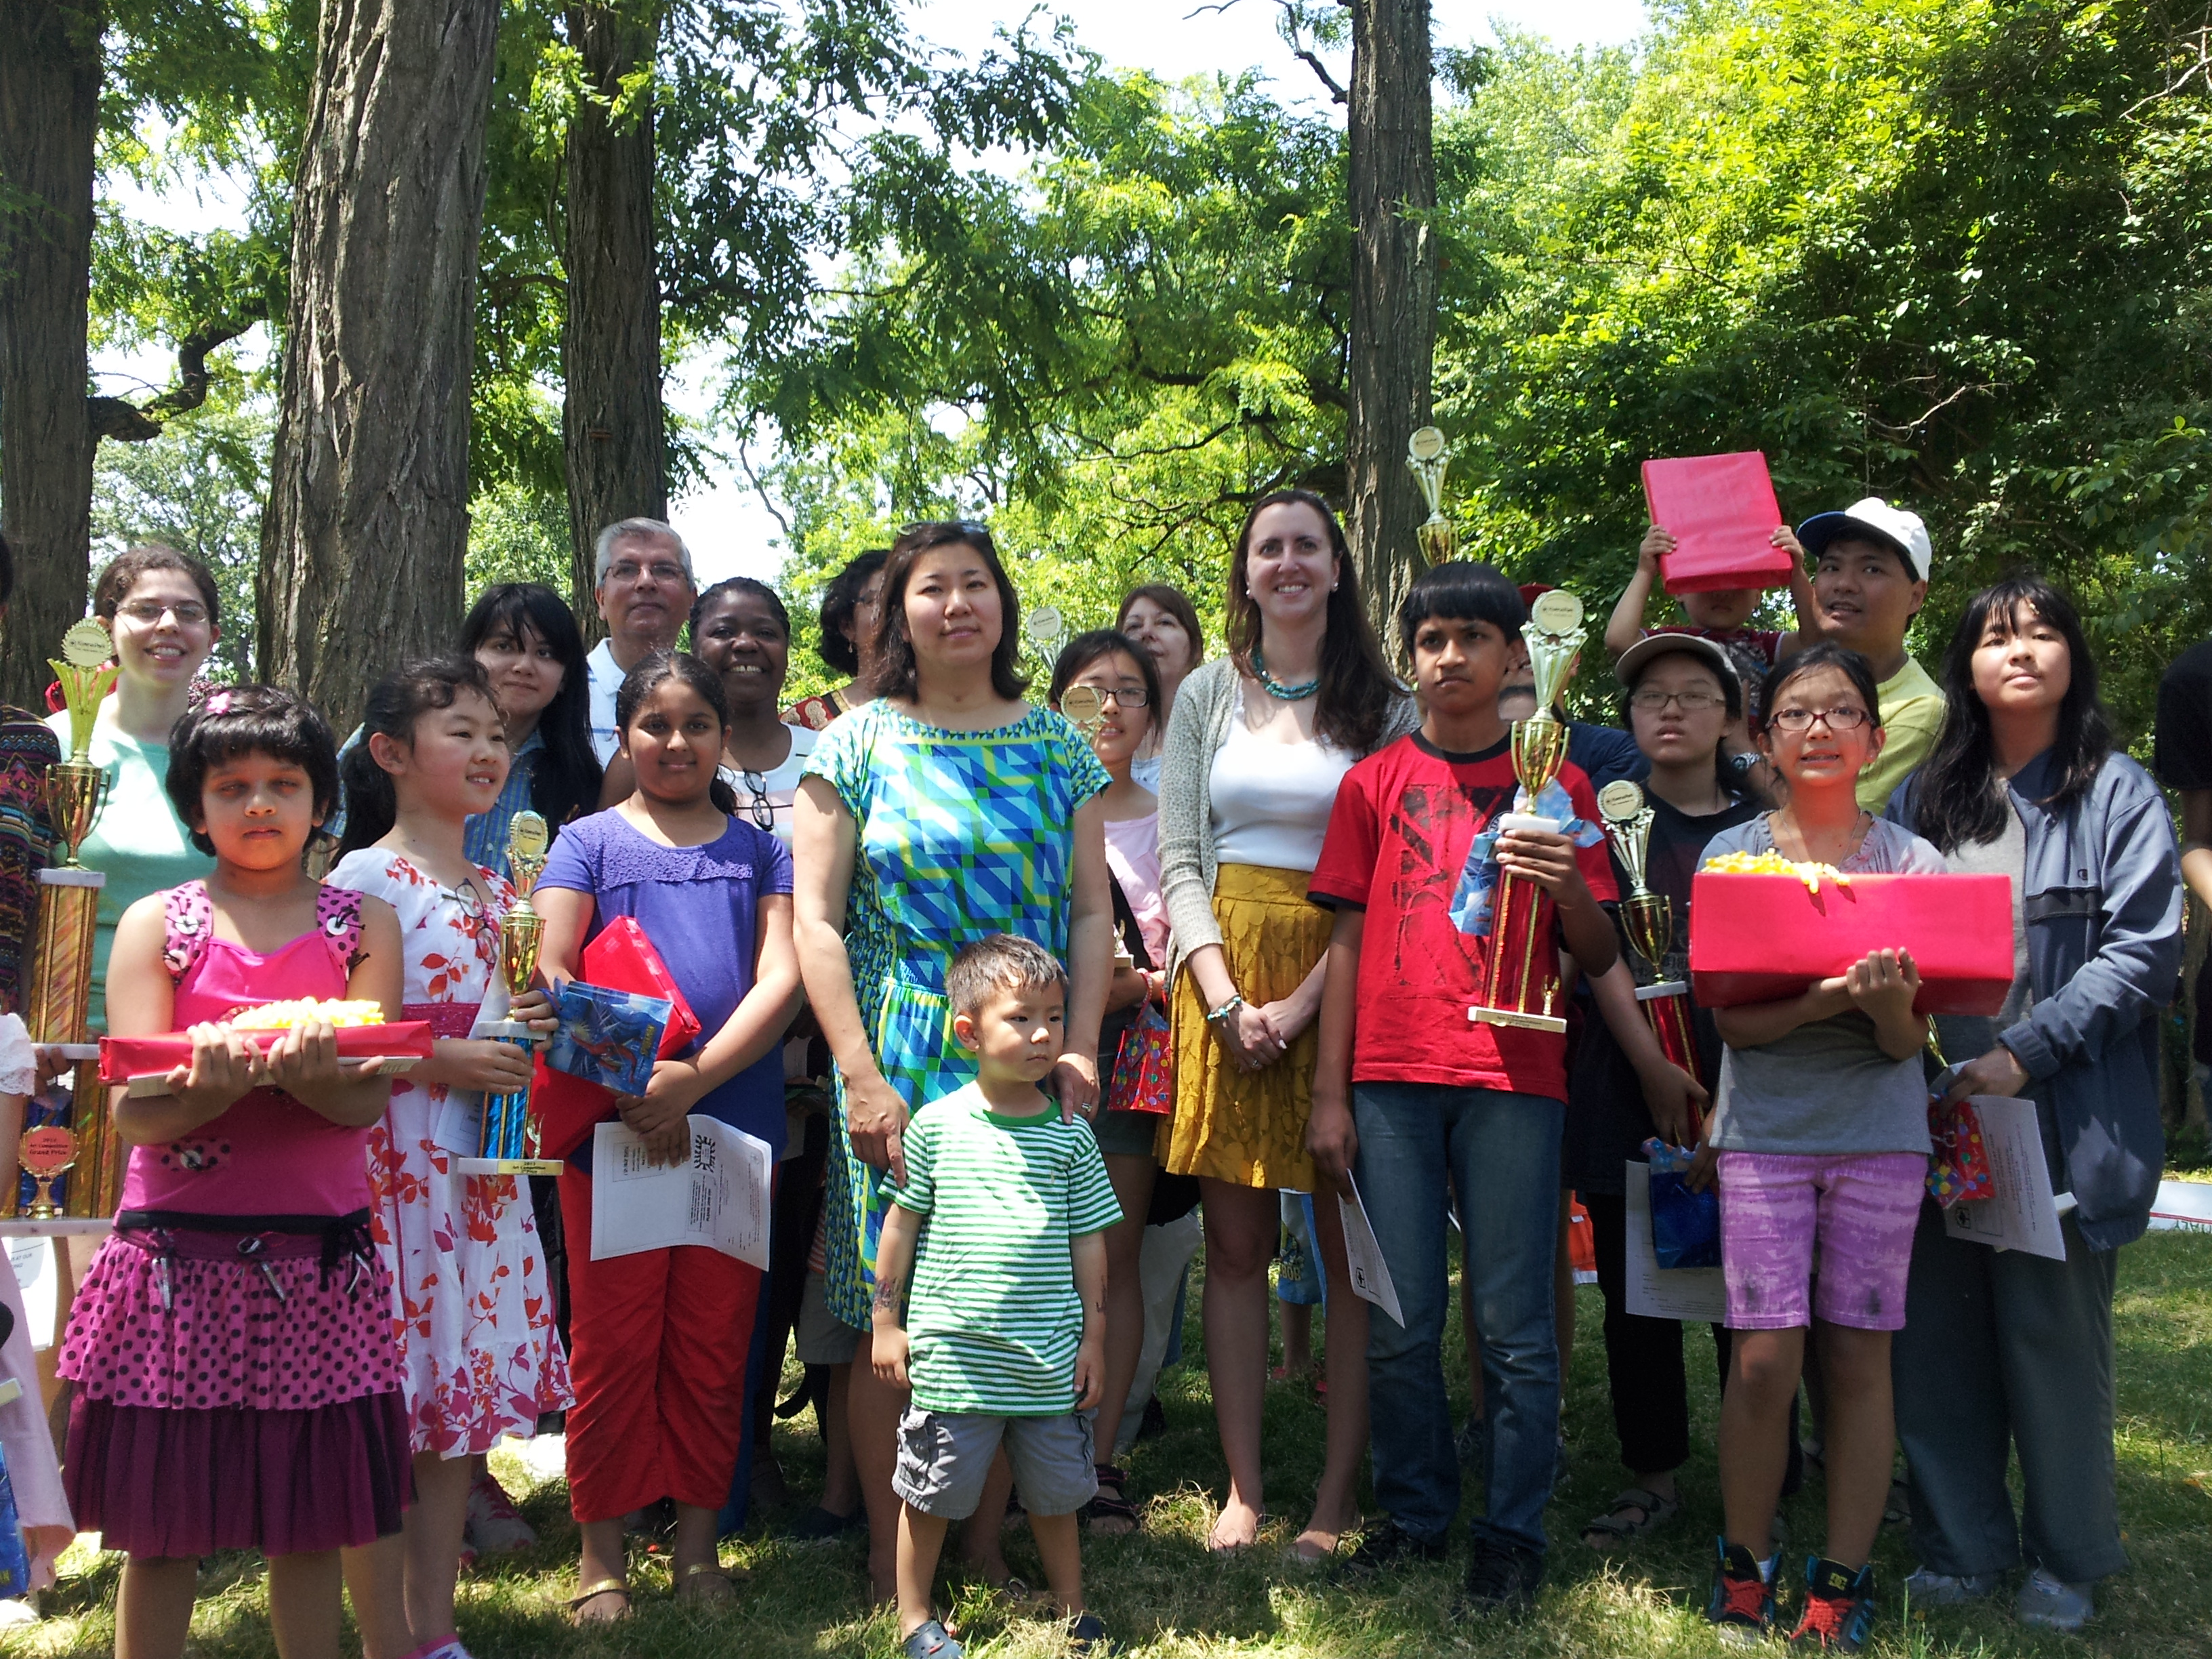 Assemblywoman Nily Rozic co-sponsored the annual Kissena Park Civic Association art contest, and distributed awards with Congresswoman Grace Meng.